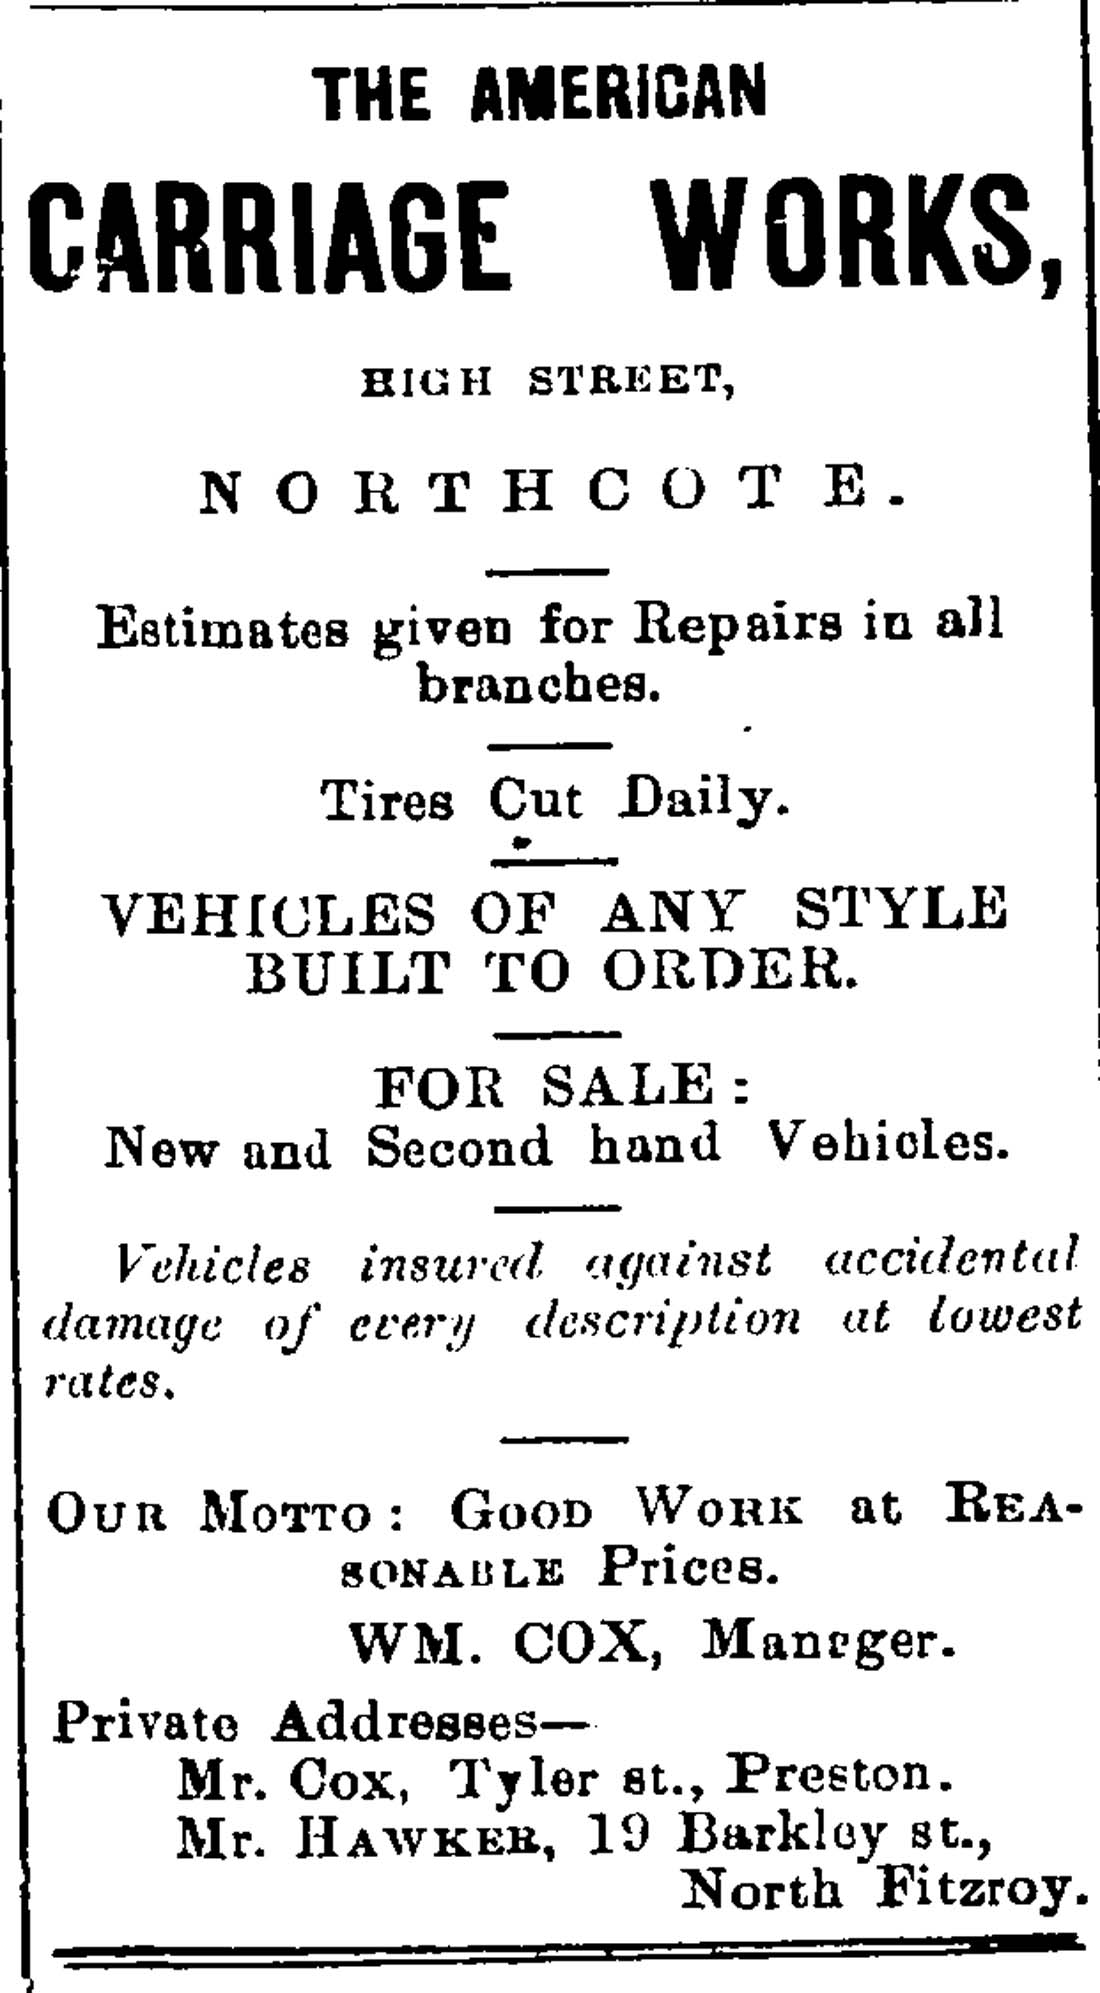 Image if Northcote Leader Advertisement for the American Carriage Company.